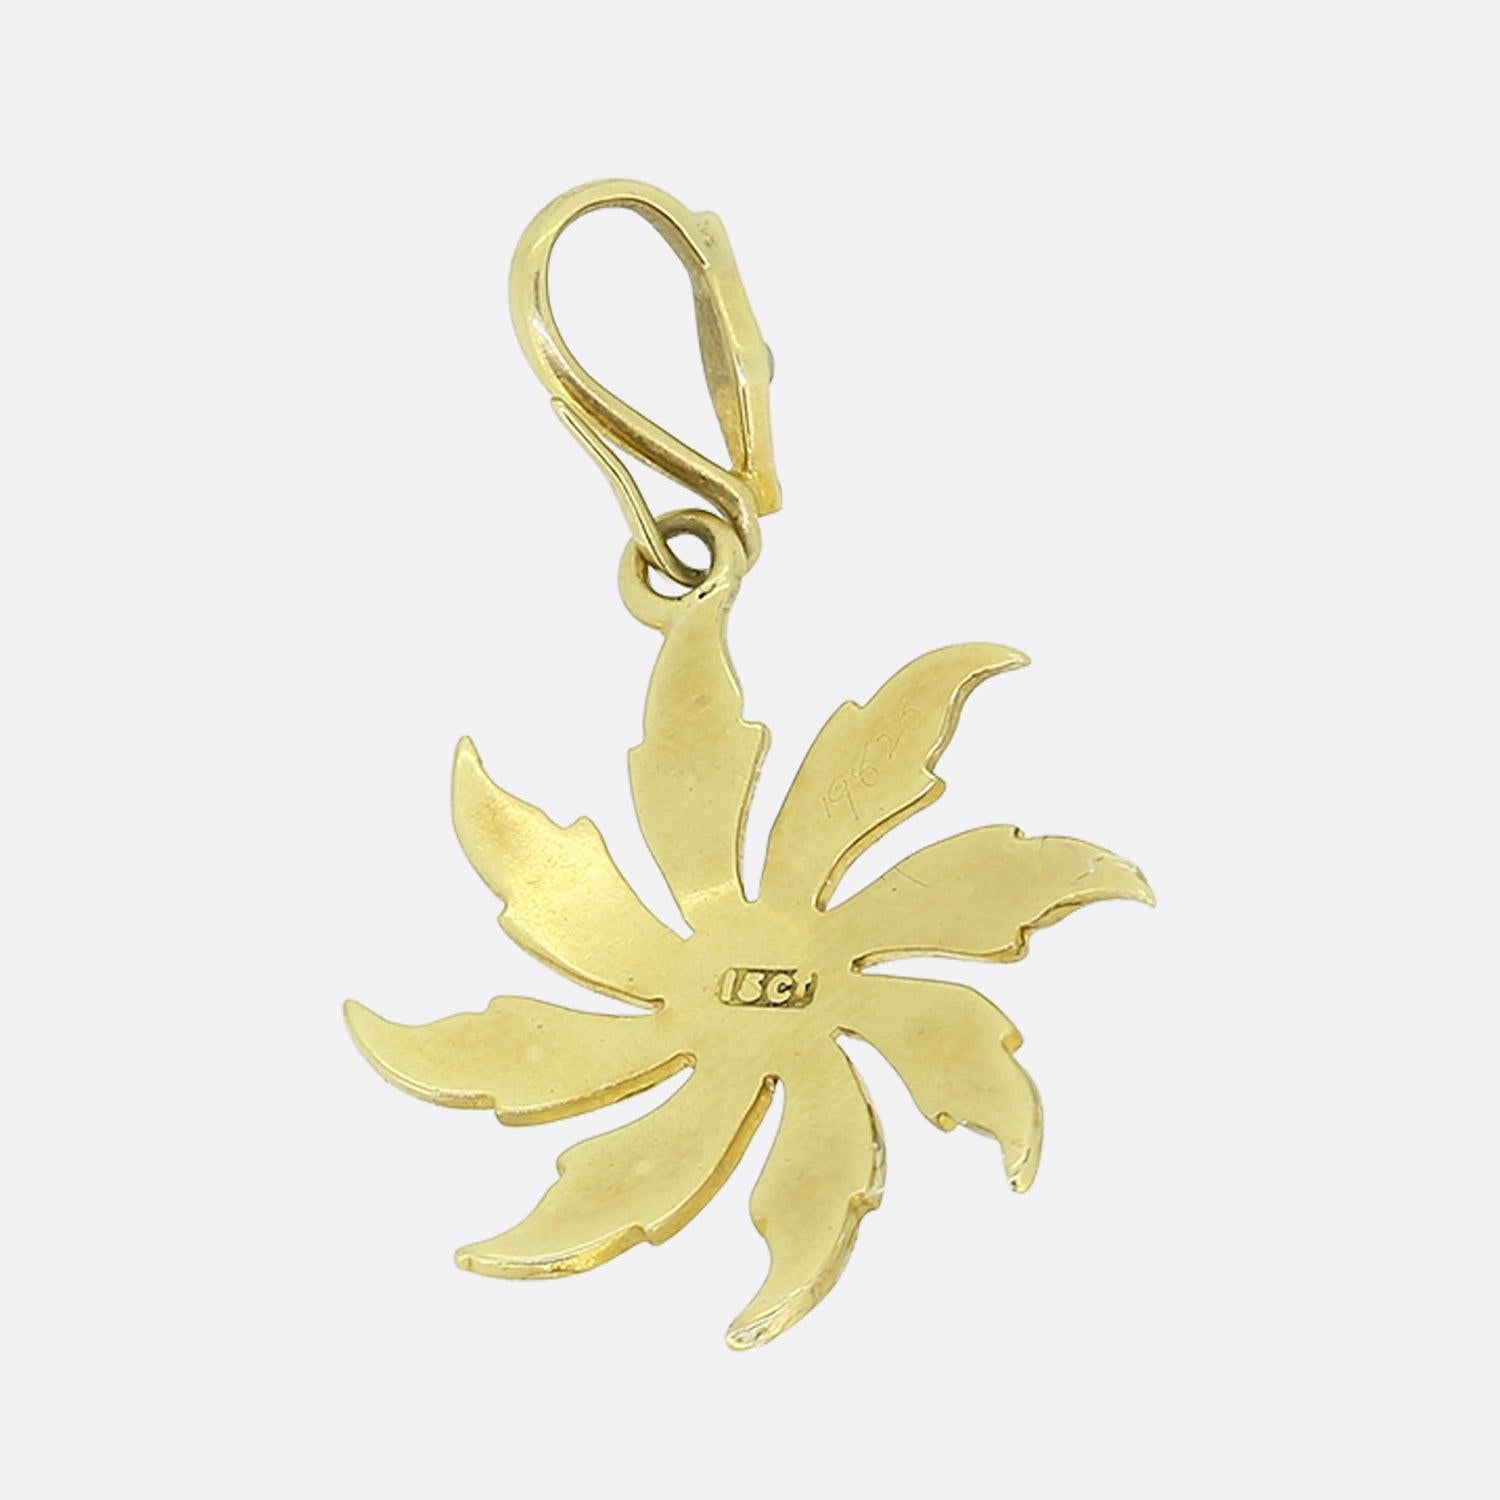 Here we have a splendid little pendant dating back to the Victorian era. This antique piece has been crafted from 18ct yellow gold into the shape of a sunflower flailing in the wind. Each of the eight petals have been set with a trio of rounded seed